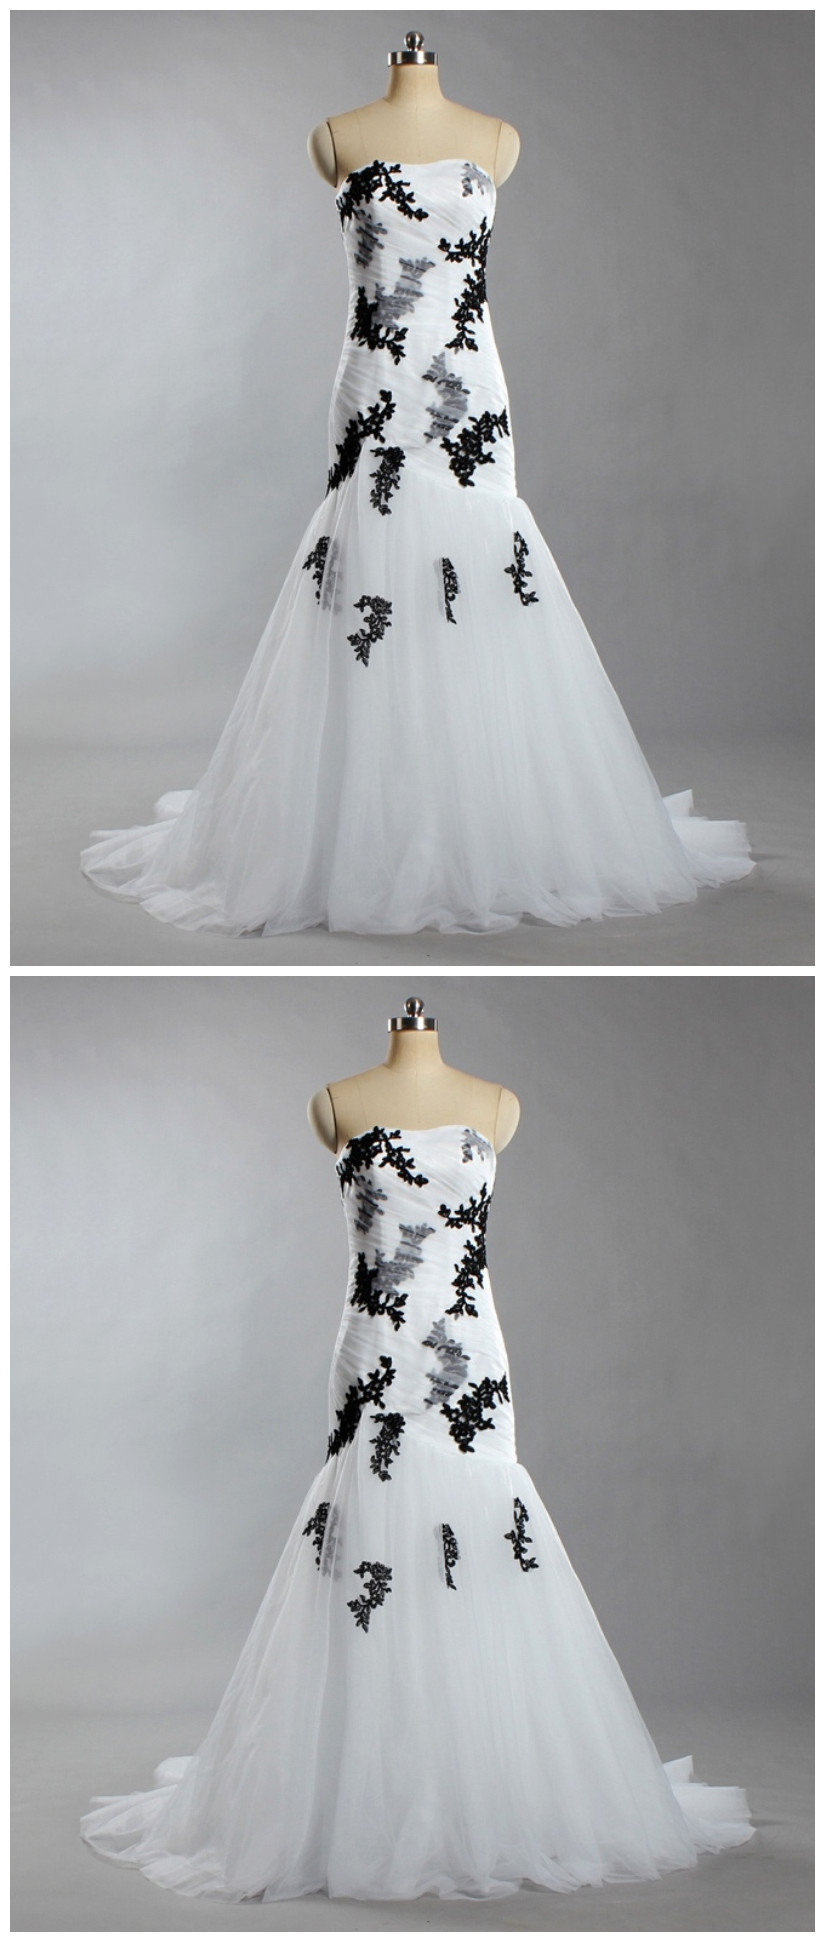 Women's Strapless Flowers Tulle Ball Gown White And Black Wedding Dresses For Bride